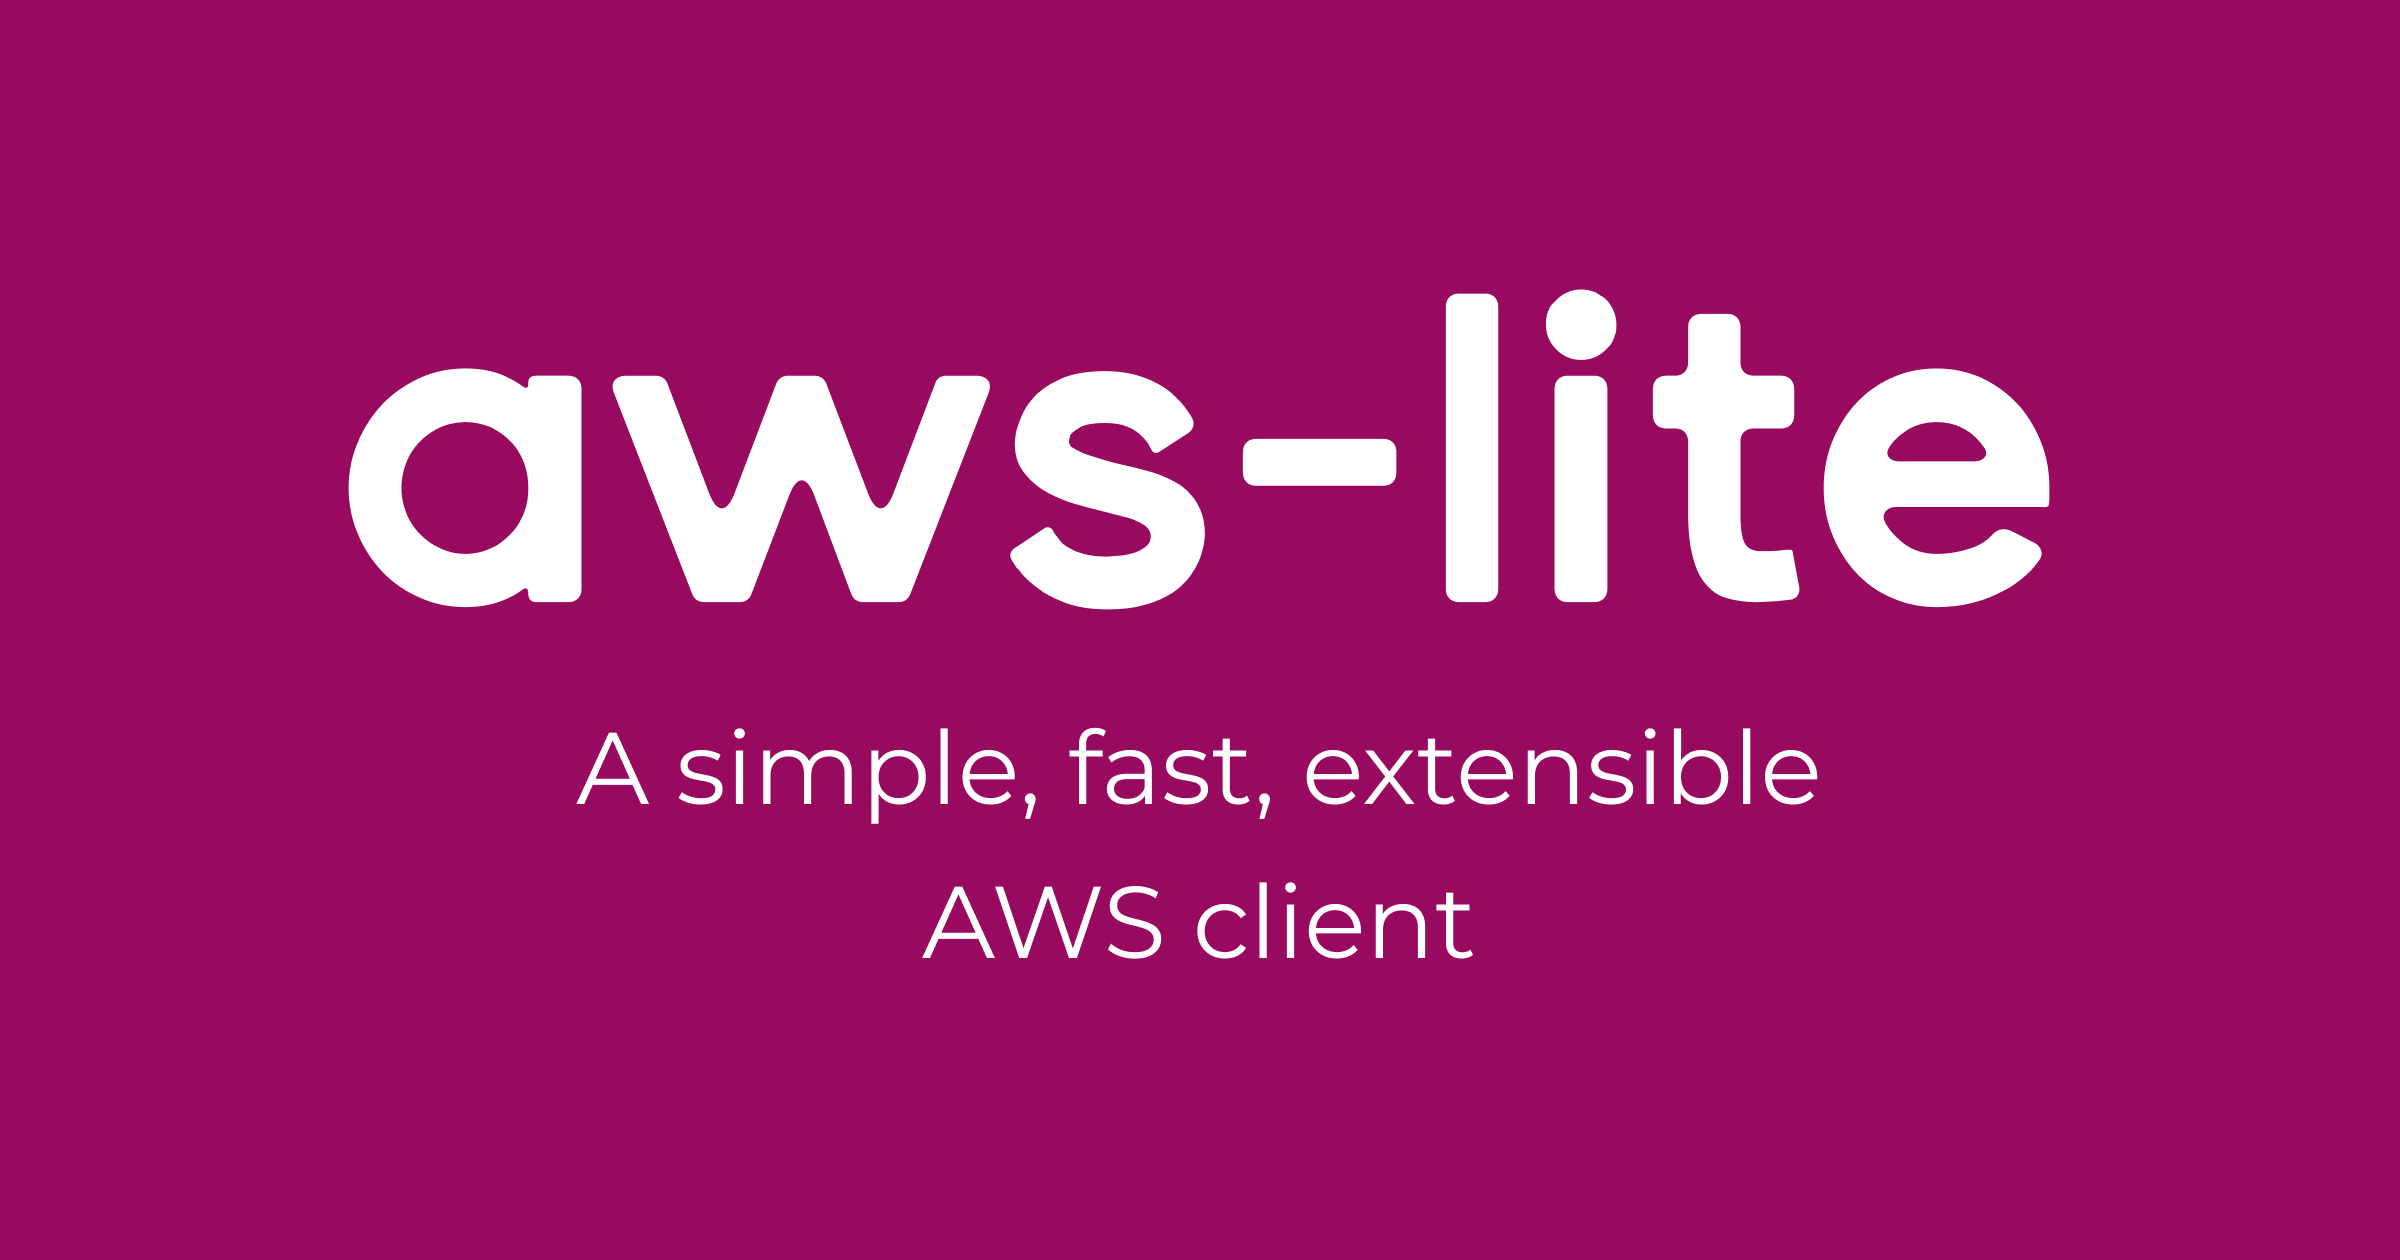 aws-lite A simple, fast, extensible AWS client